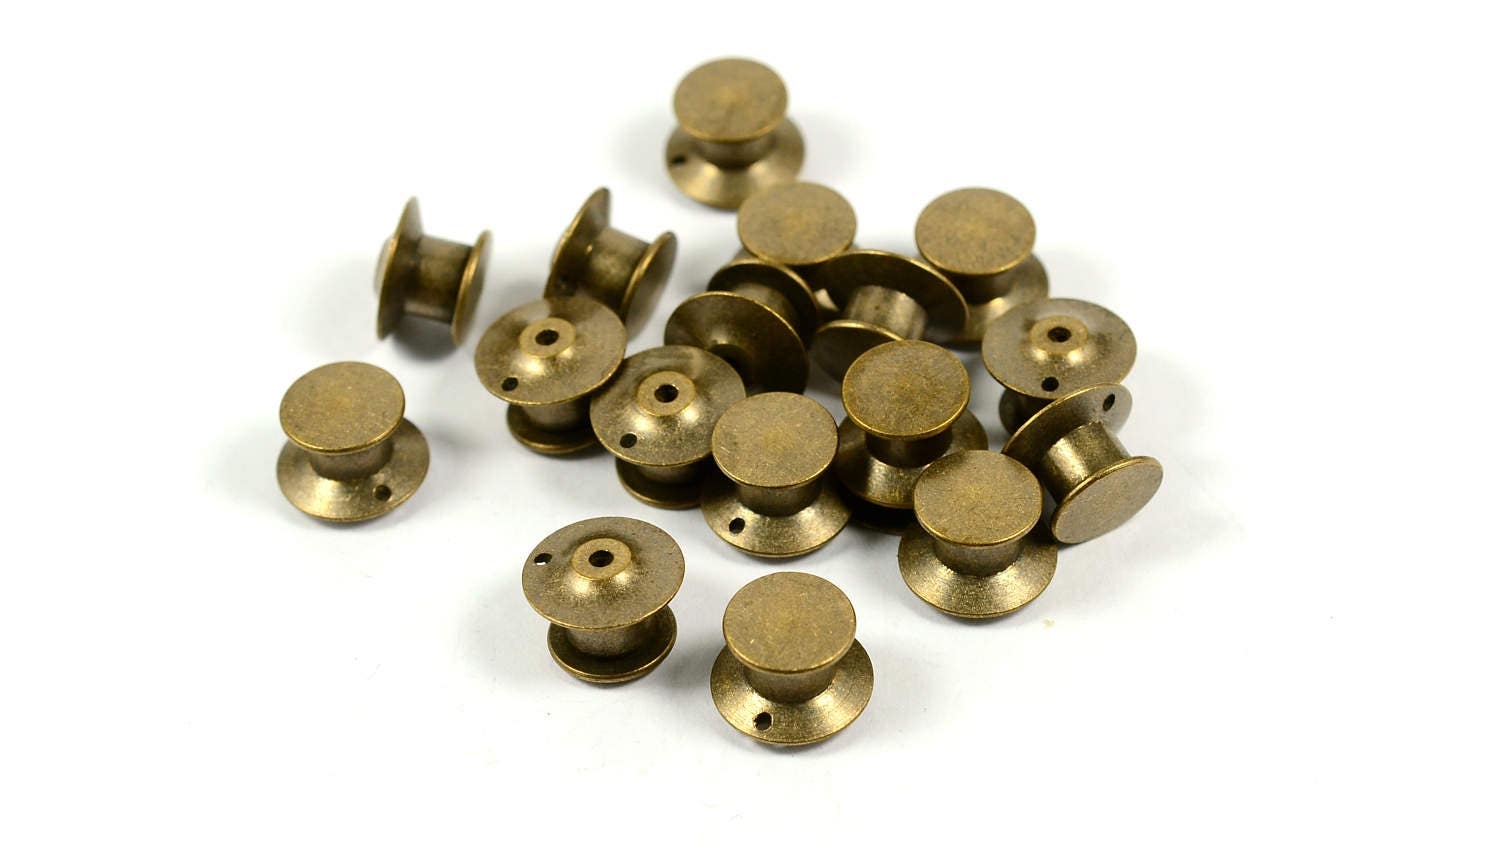 25 Locking Ball Top Tie Tac Pin Backs Clutch Clasp Fastener Gold or Chrome  HRC 